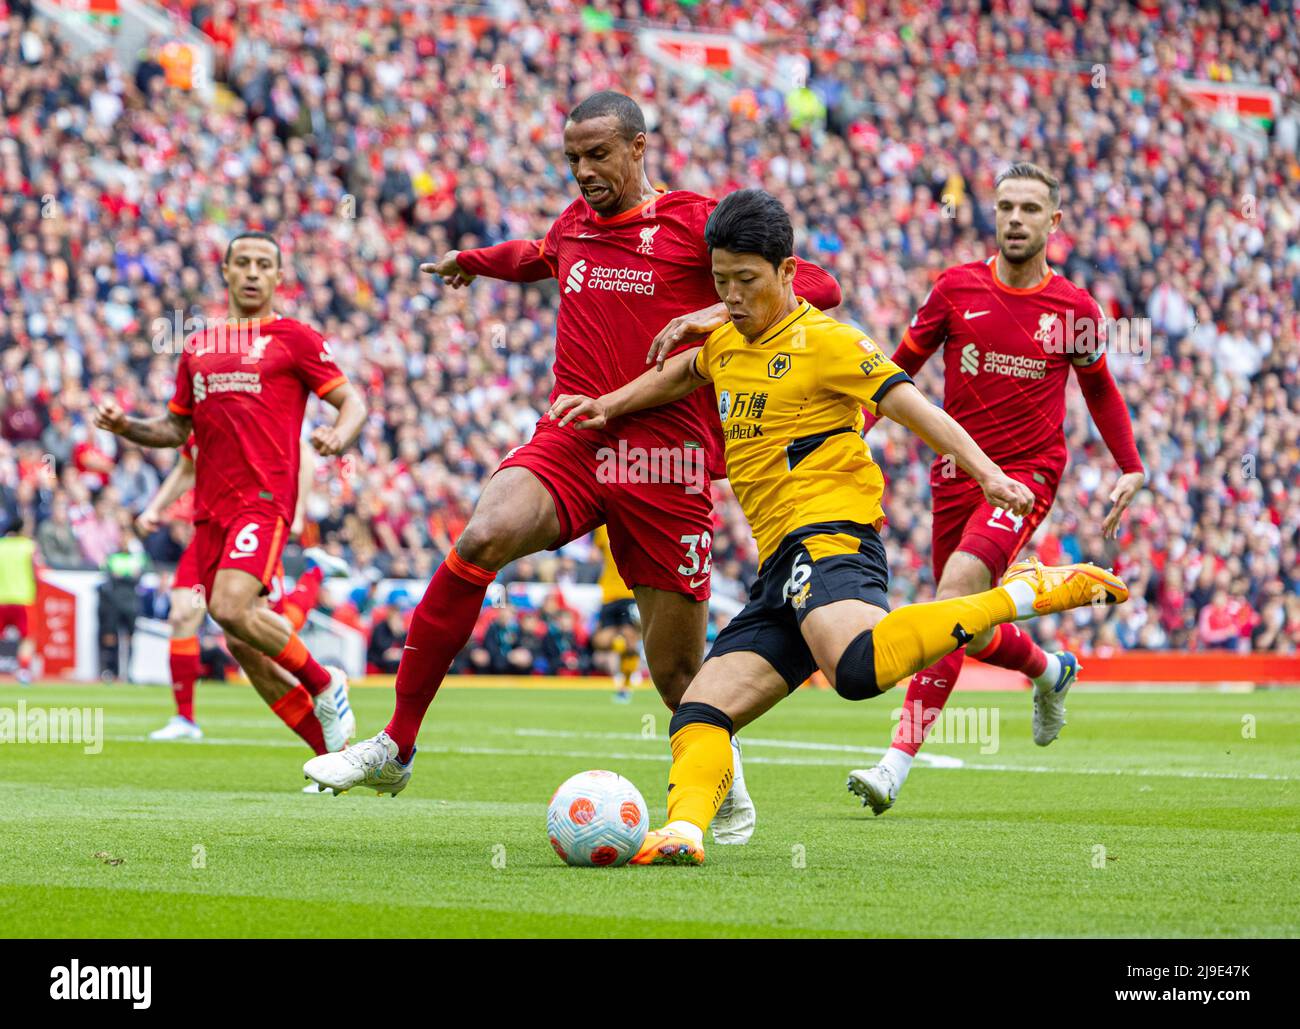 (220523) -- LIVERPOOL, May 23, 2022 (Xinhua) -- Liverpool's Joel Matip (L, front) vies with Wolverhampton Wanderers' Hwang Hee-chan (R, front) during the English Premier League match between Liverpool and Wolverhampton Wanderers in Liverpool, Britain, on May 22, 2022. (Xinhua) FOR EDITORIAL USE ONLY. NOT FOR SALE FOR MARKETING OR ADVERTISING CAMPAIGNS. NO USE WITH UNAUTHORIZED AUDIO, VIDEO, DATA, FIXTURE LISTS, CLUB/LEAGUE LOGOS OR 'LIVE' SERVICES. ONLINE IN-MATCH USE LIMITED TO 45 IMAGES, NO VIDEO EMULATION. NO USE IN BETTING, GAMES OR SINGLE CLUB/LEAGUE/PLAYER PUBLICATIONS. Stock Photo